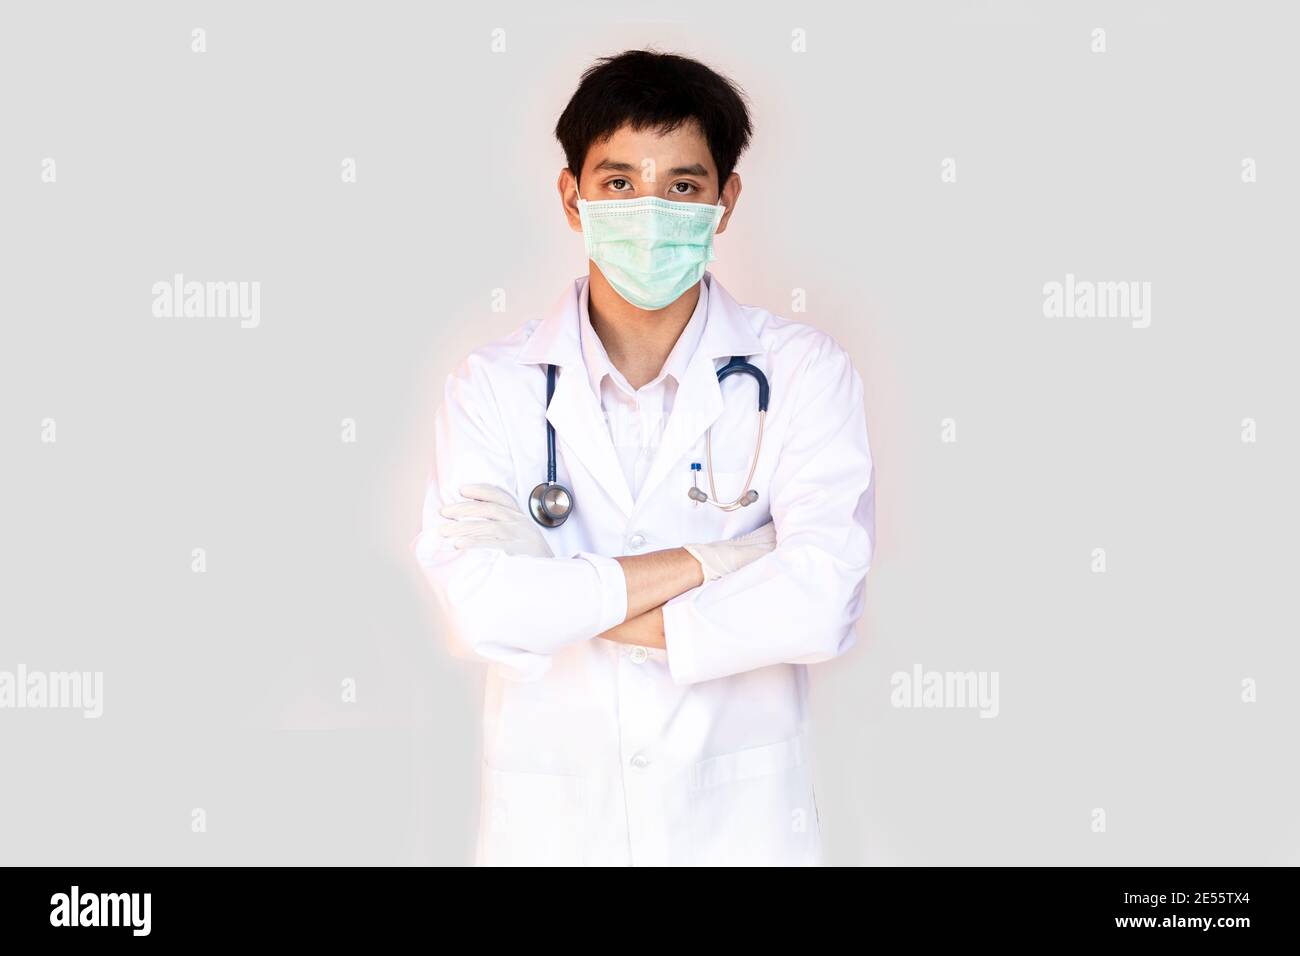 A doctor posing with arms crossed on a white background is wearing a medical face mask and stethoscope. Young Asian doctor wearing a white coat. Stock Photo